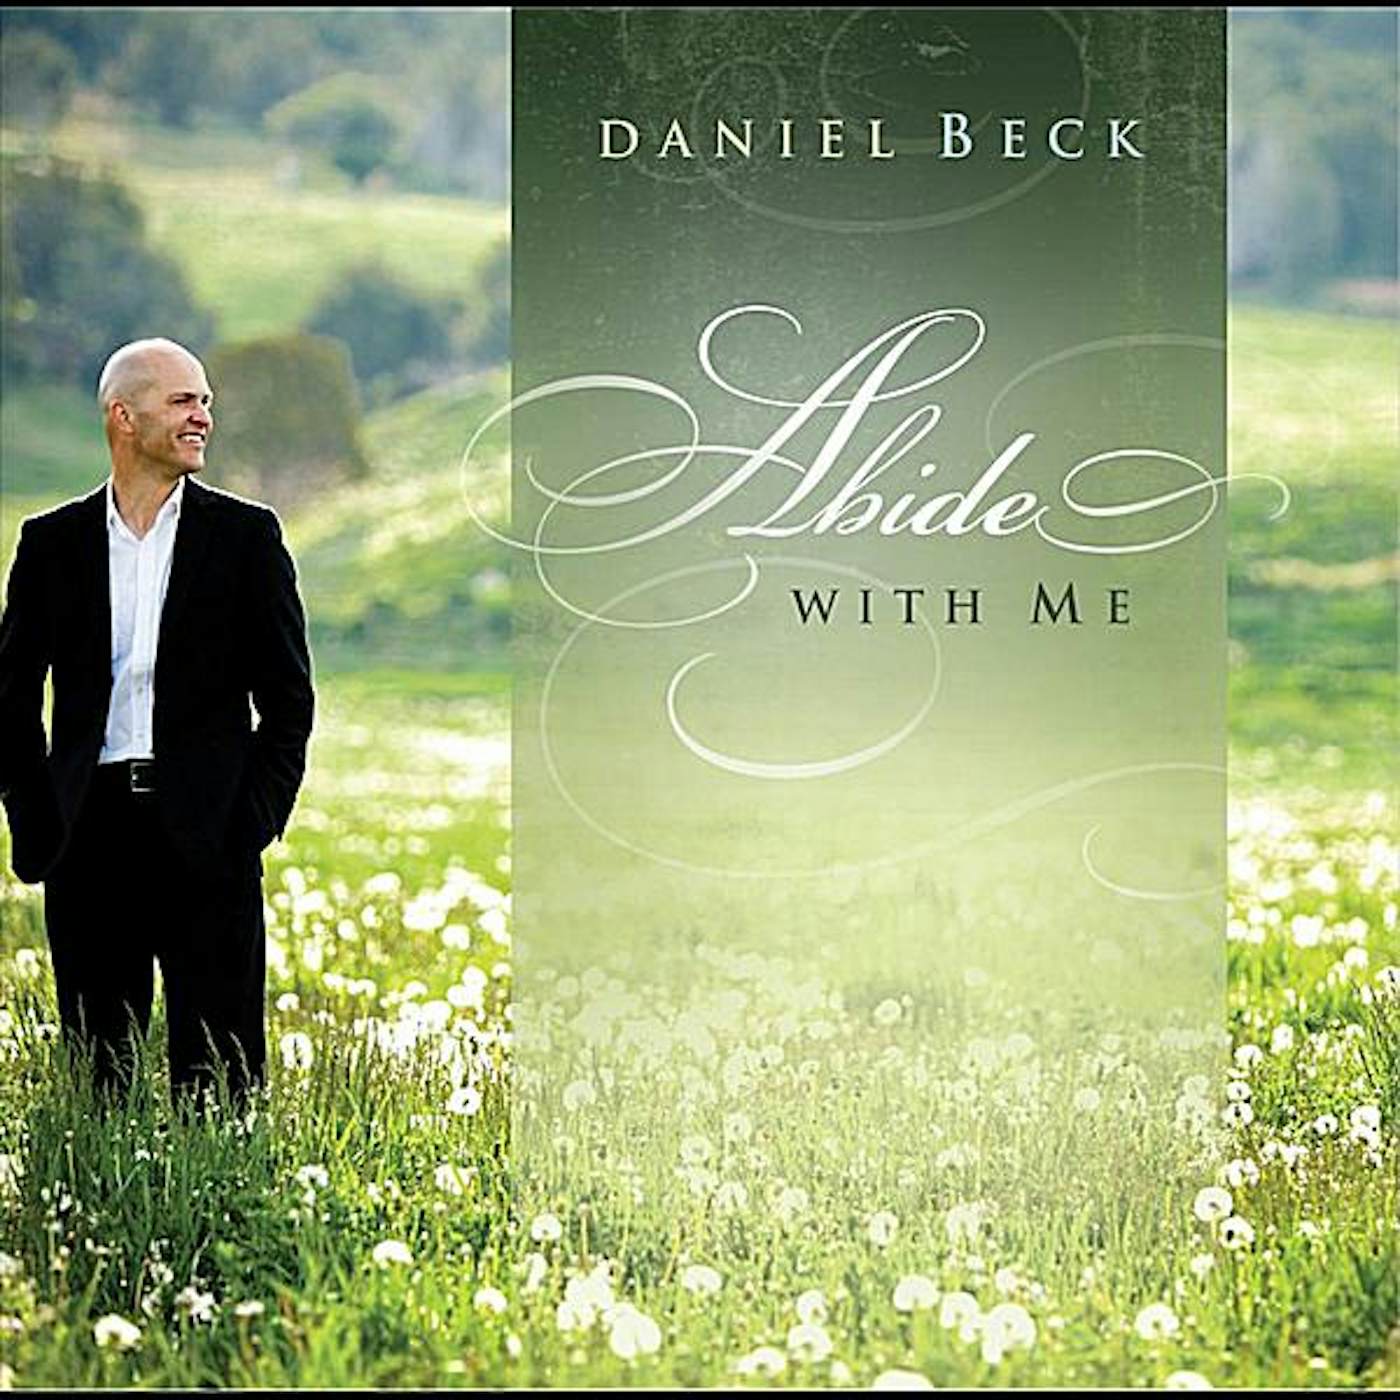 Daniel Beck ABIDE WITH ME CD